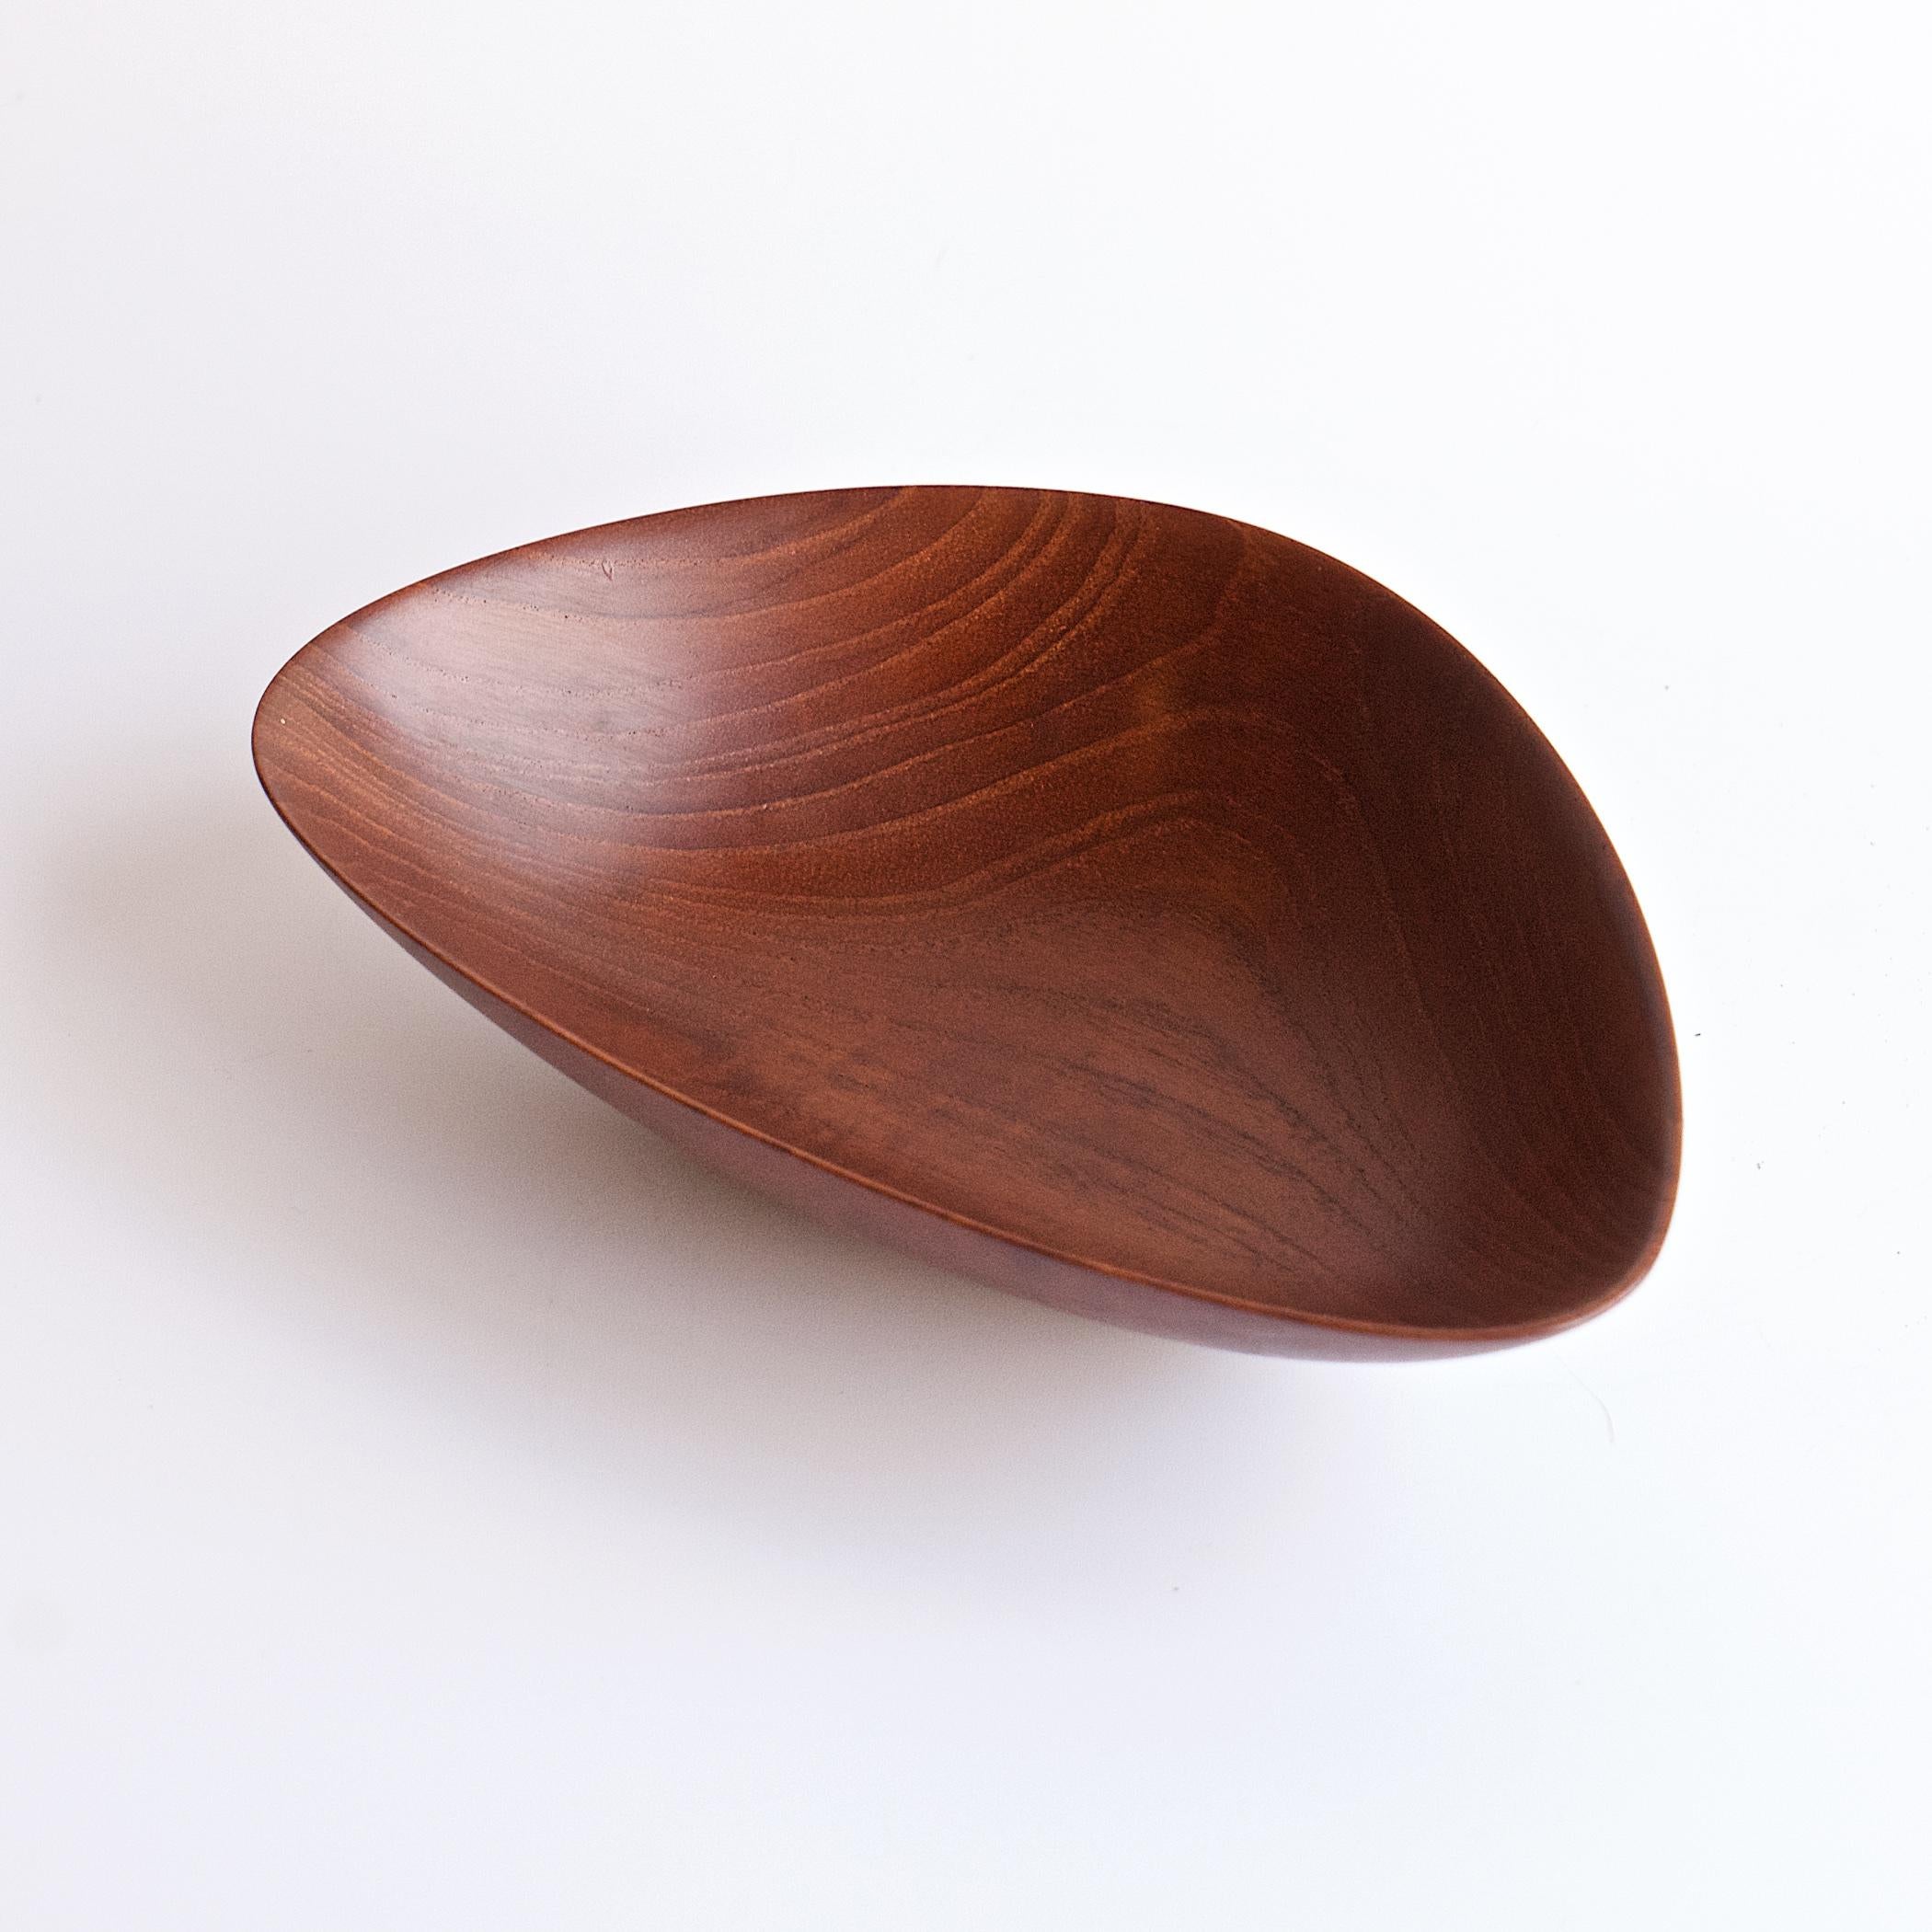 Obscure Danish Design Company, AL-BO. Highly finished, thin walled Teak wedge-shaped bowl.